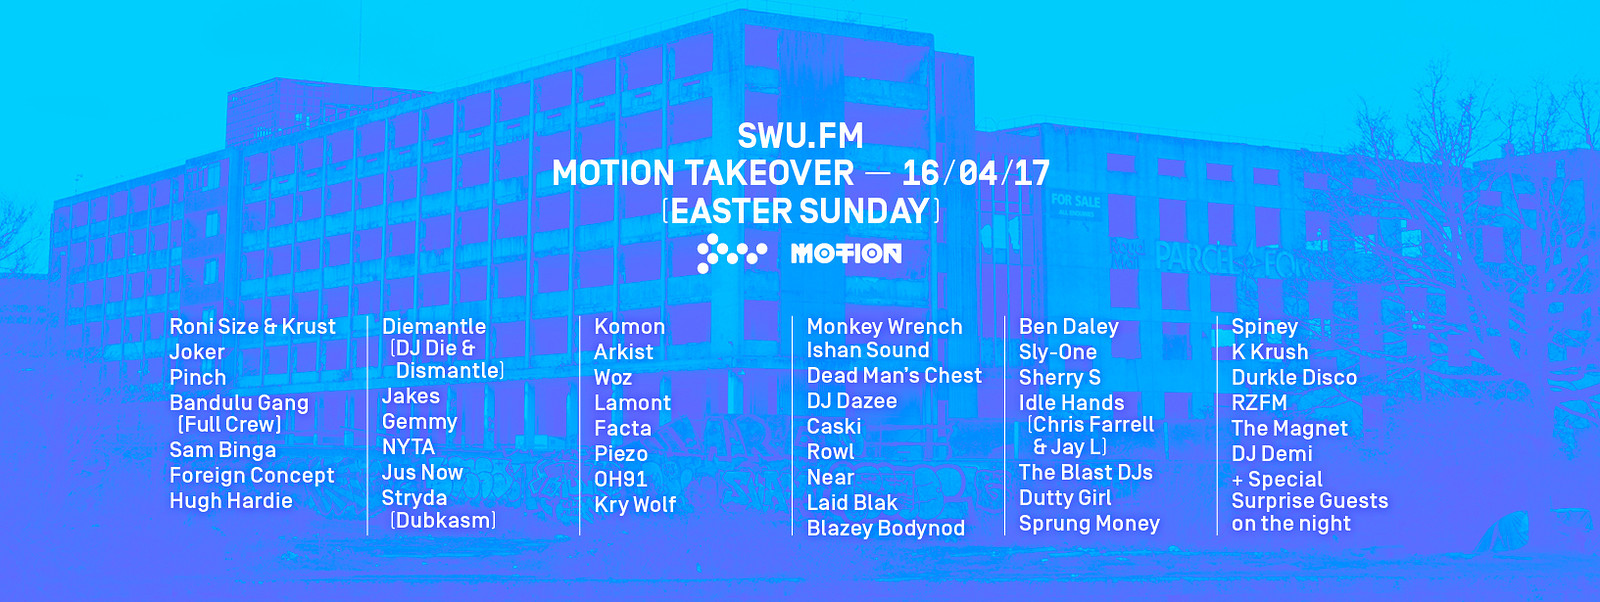 SWU.FM Takeover at Motion